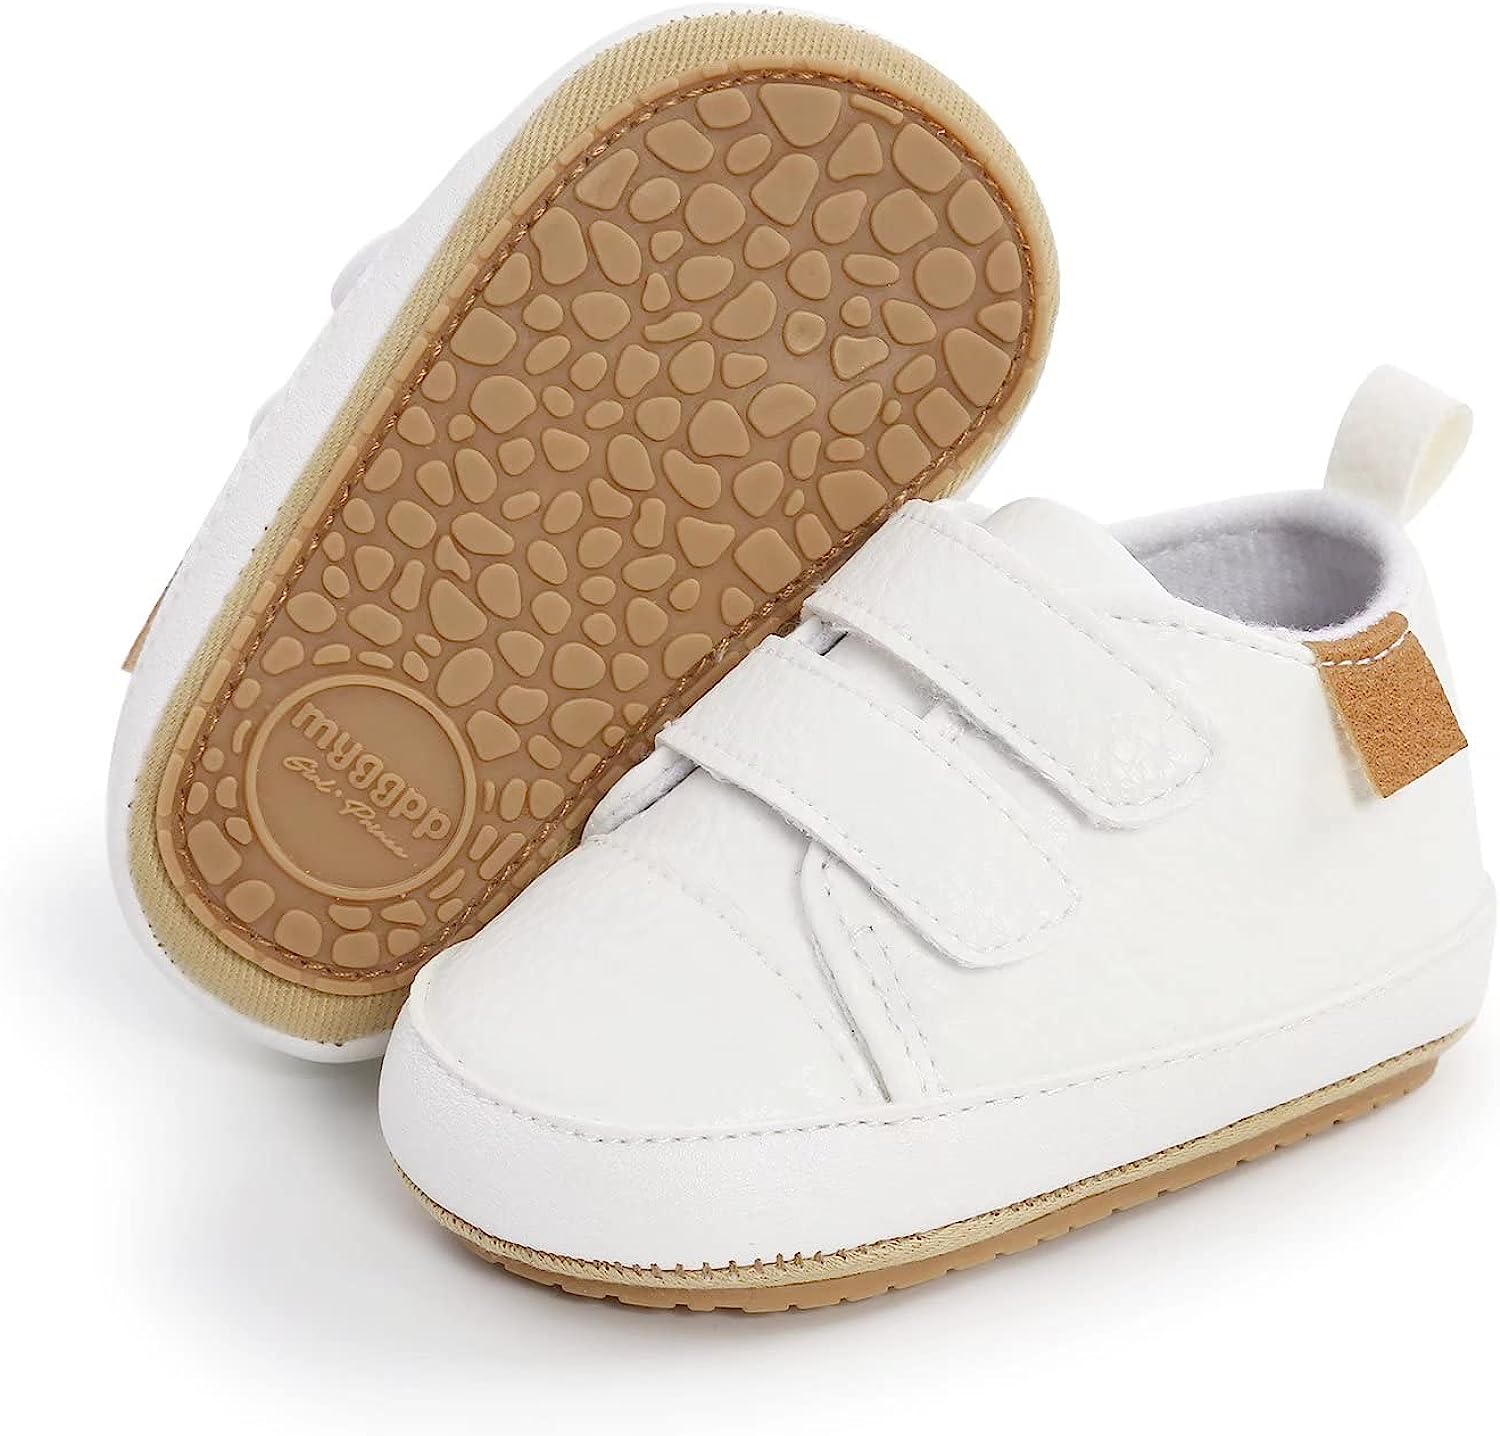 BABSMULY Baby Boys Girls Shoes Non-Slip Rubber Sole [...]